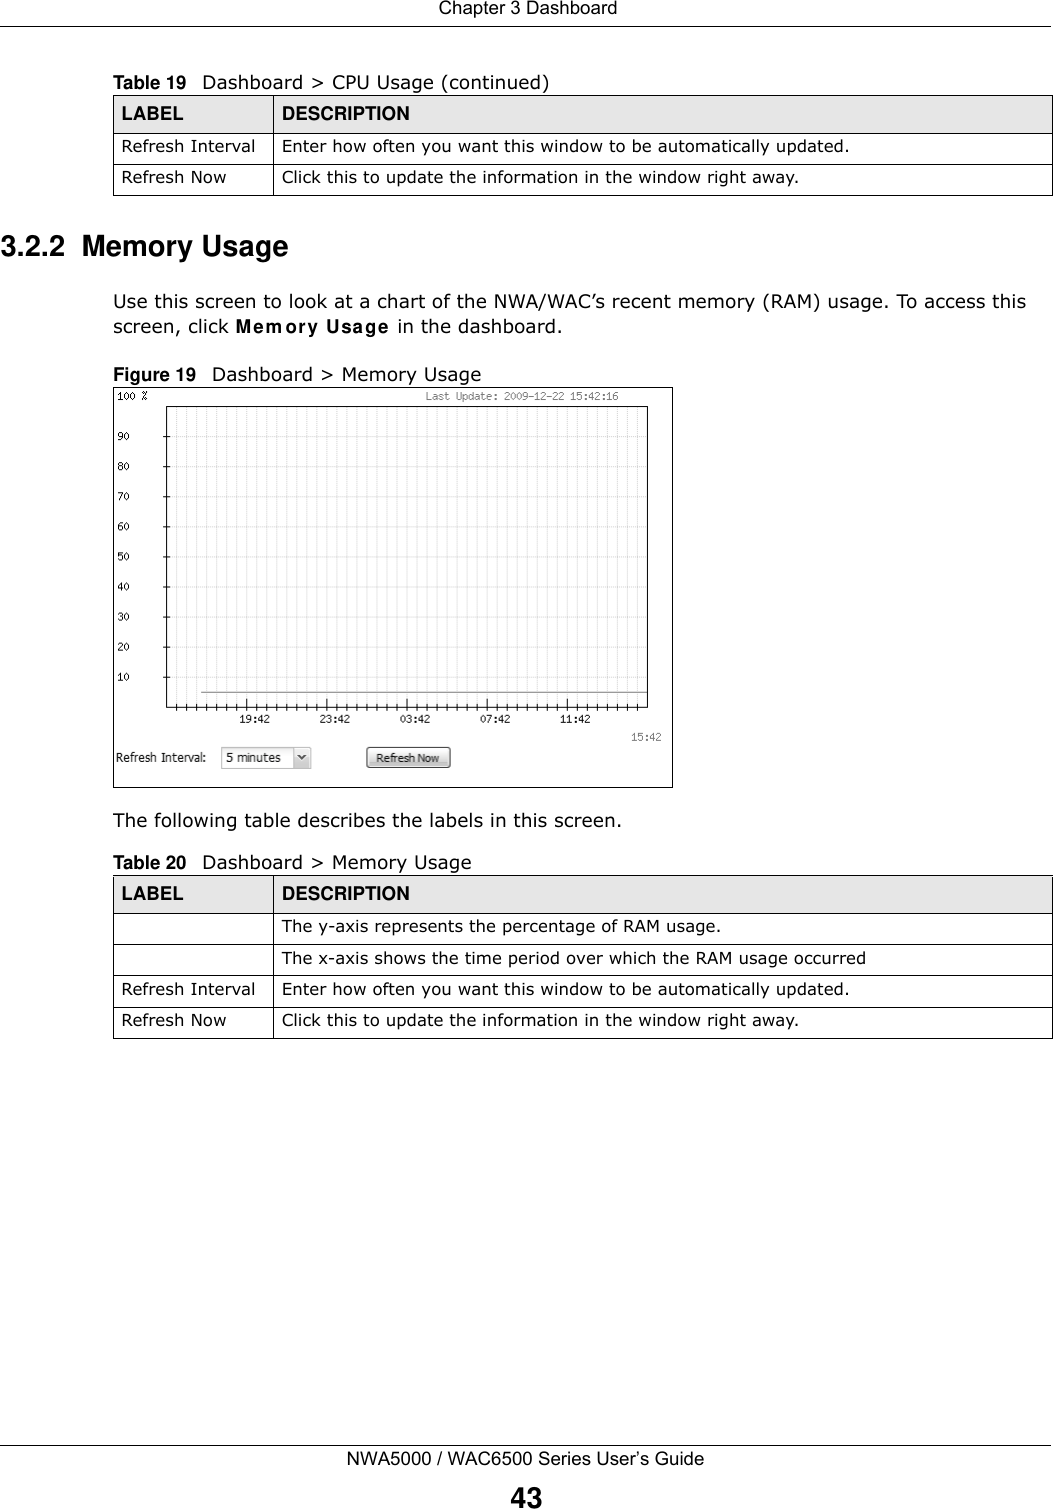  Chapter 3 DashboardNWA5000 / WAC6500 Series User’s Guide433.2.2  Memory UsageUse this screen to look at a chart of the NWA/WAC’s recent memory (RAM) usage. To access this screen, click Me m ory Usa ge in the dashboard.Figure 19   Dashboard &gt; Memory UsageThe following table describes the labels in this screen.  Refresh Interval Enter how often you want this window to be automatically updated.Refresh Now Click this to update the information in the window right away. Table 19   Dashboard &gt; CPU Usage (continued)LABEL DESCRIPTIONTable 20   Dashboard &gt; Memory UsageLABEL DESCRIPTIONThe y-axis represents the percentage of RAM usage.The x-axis shows the time period over which the RAM usage occurredRefresh Interval Enter how often you want this window to be automatically updated.Refresh Now Click this to update the information in the window right away. 